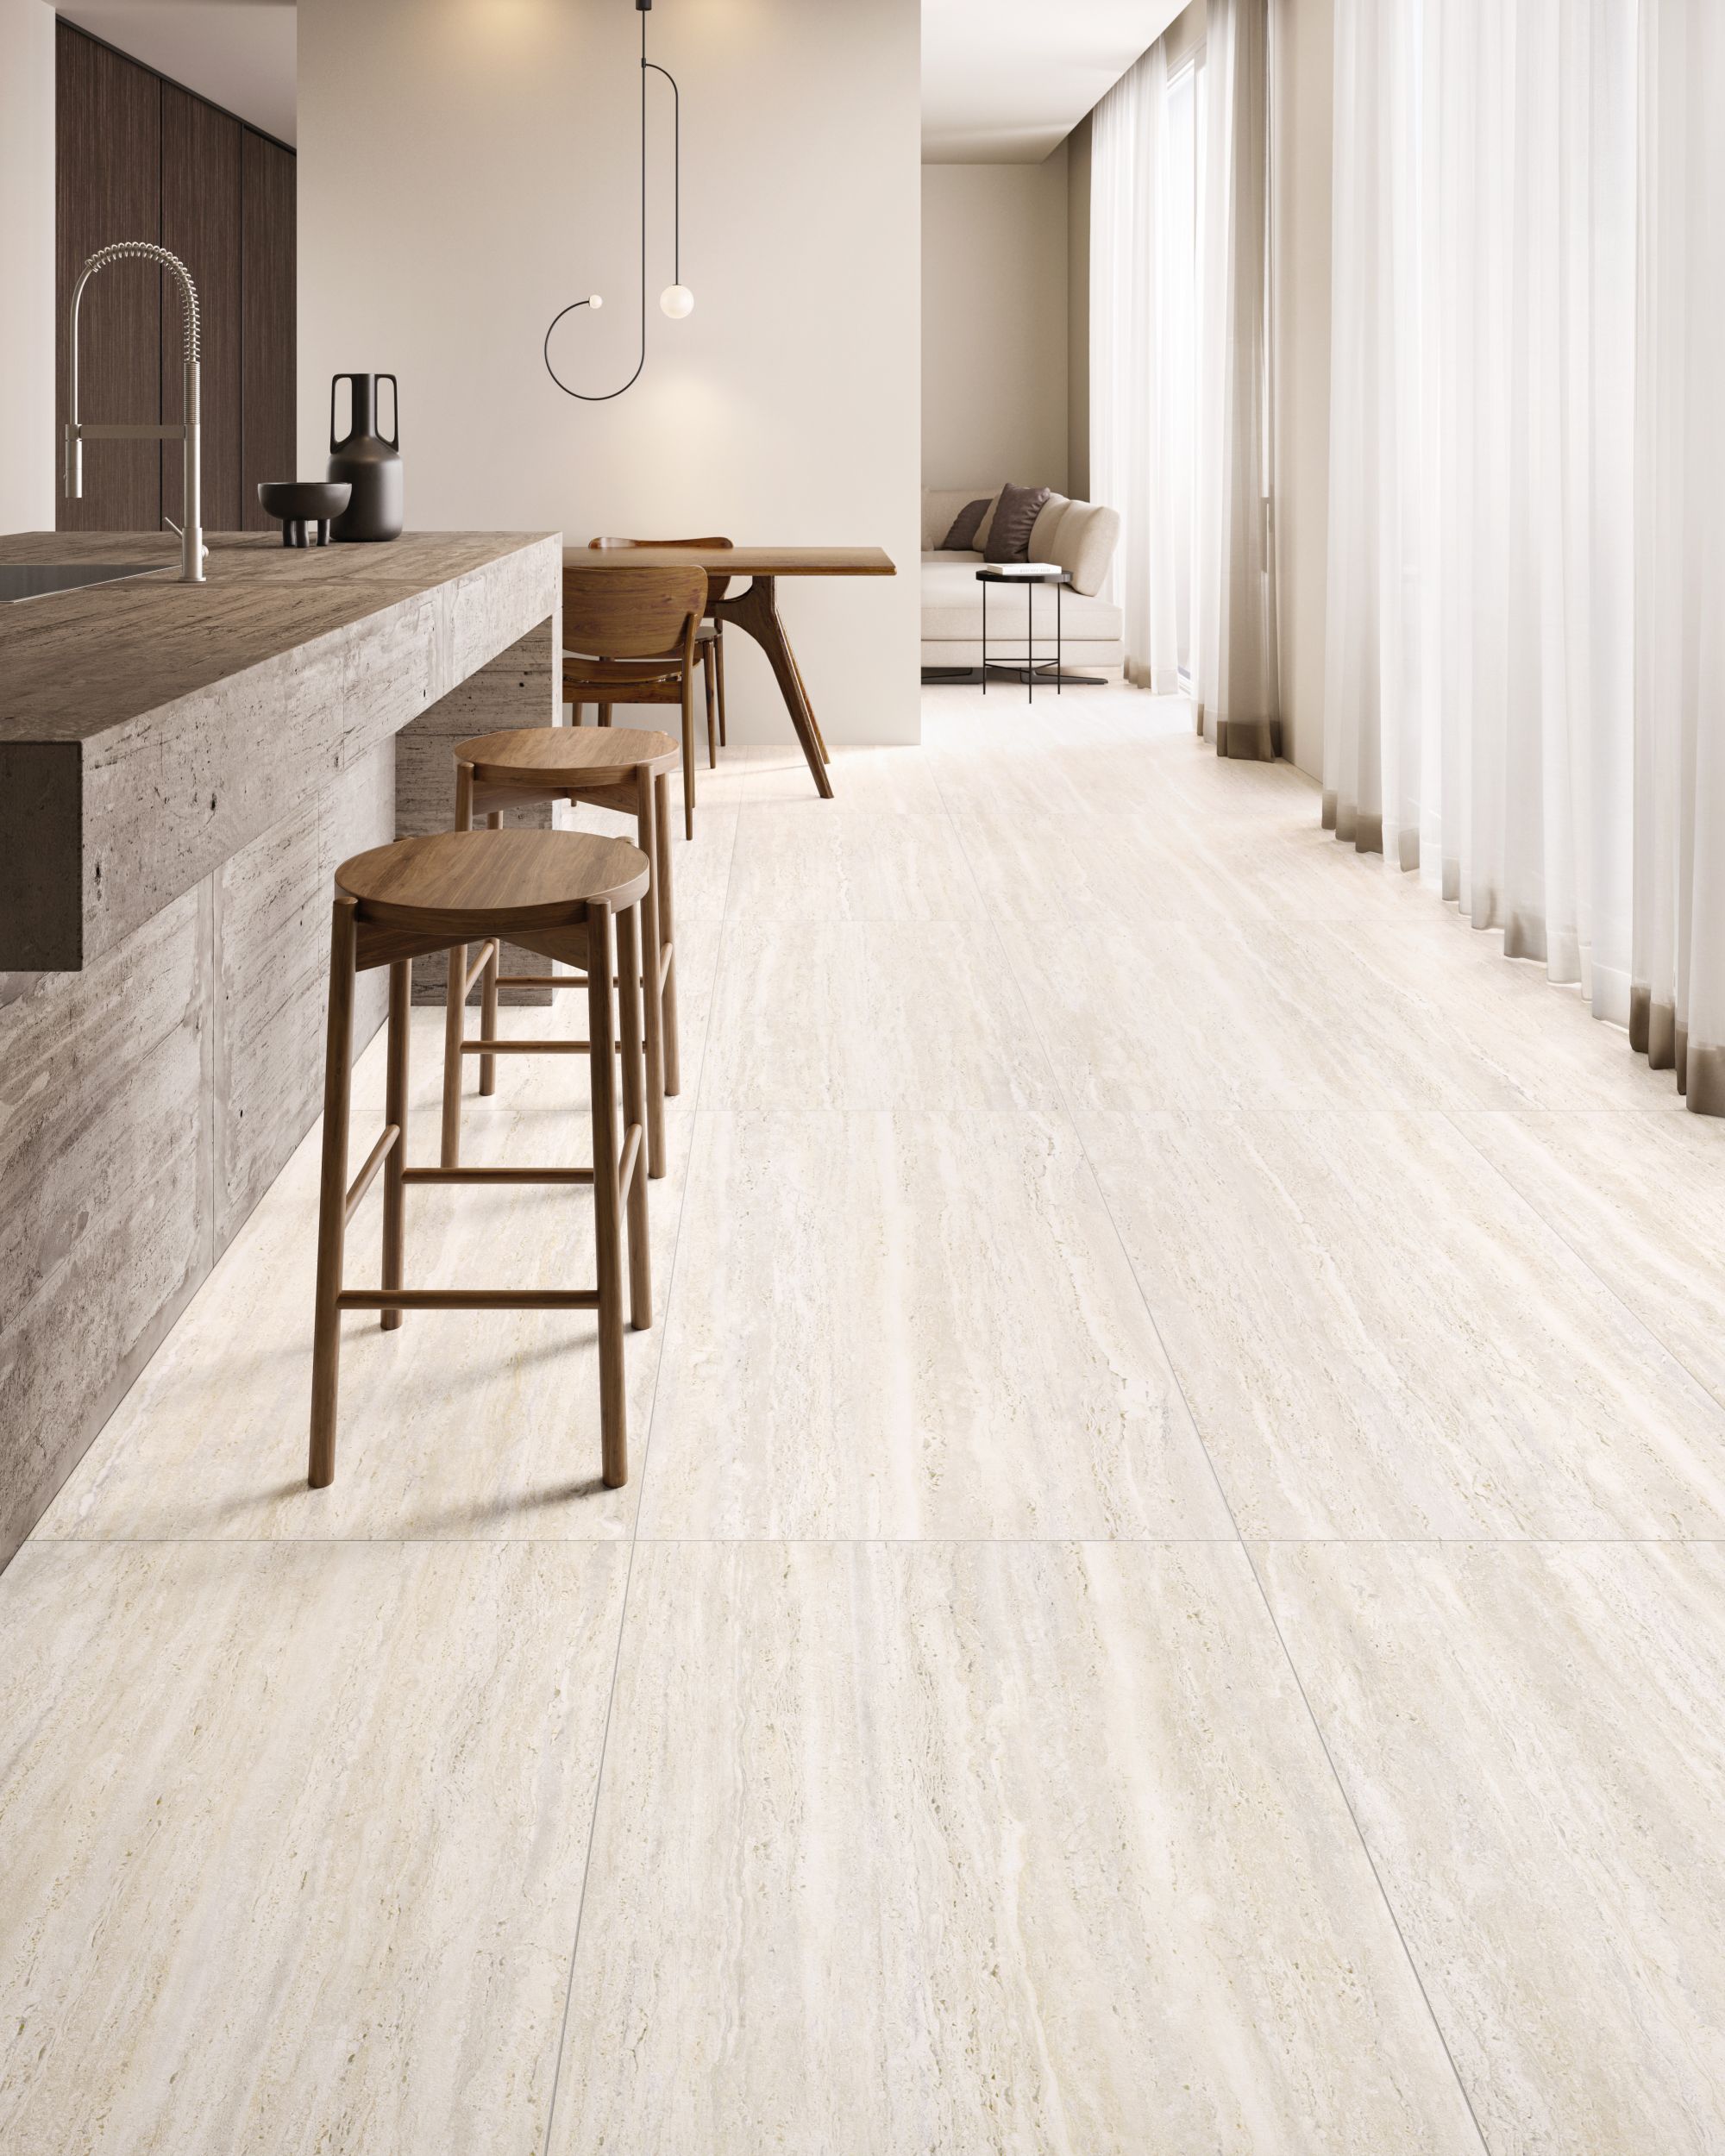 Travertine Look Porcelain Tile Called White Vein Cut from Supergres Astrum Collection, Supplied by Aximer Ceramic for the UAE Tile Market